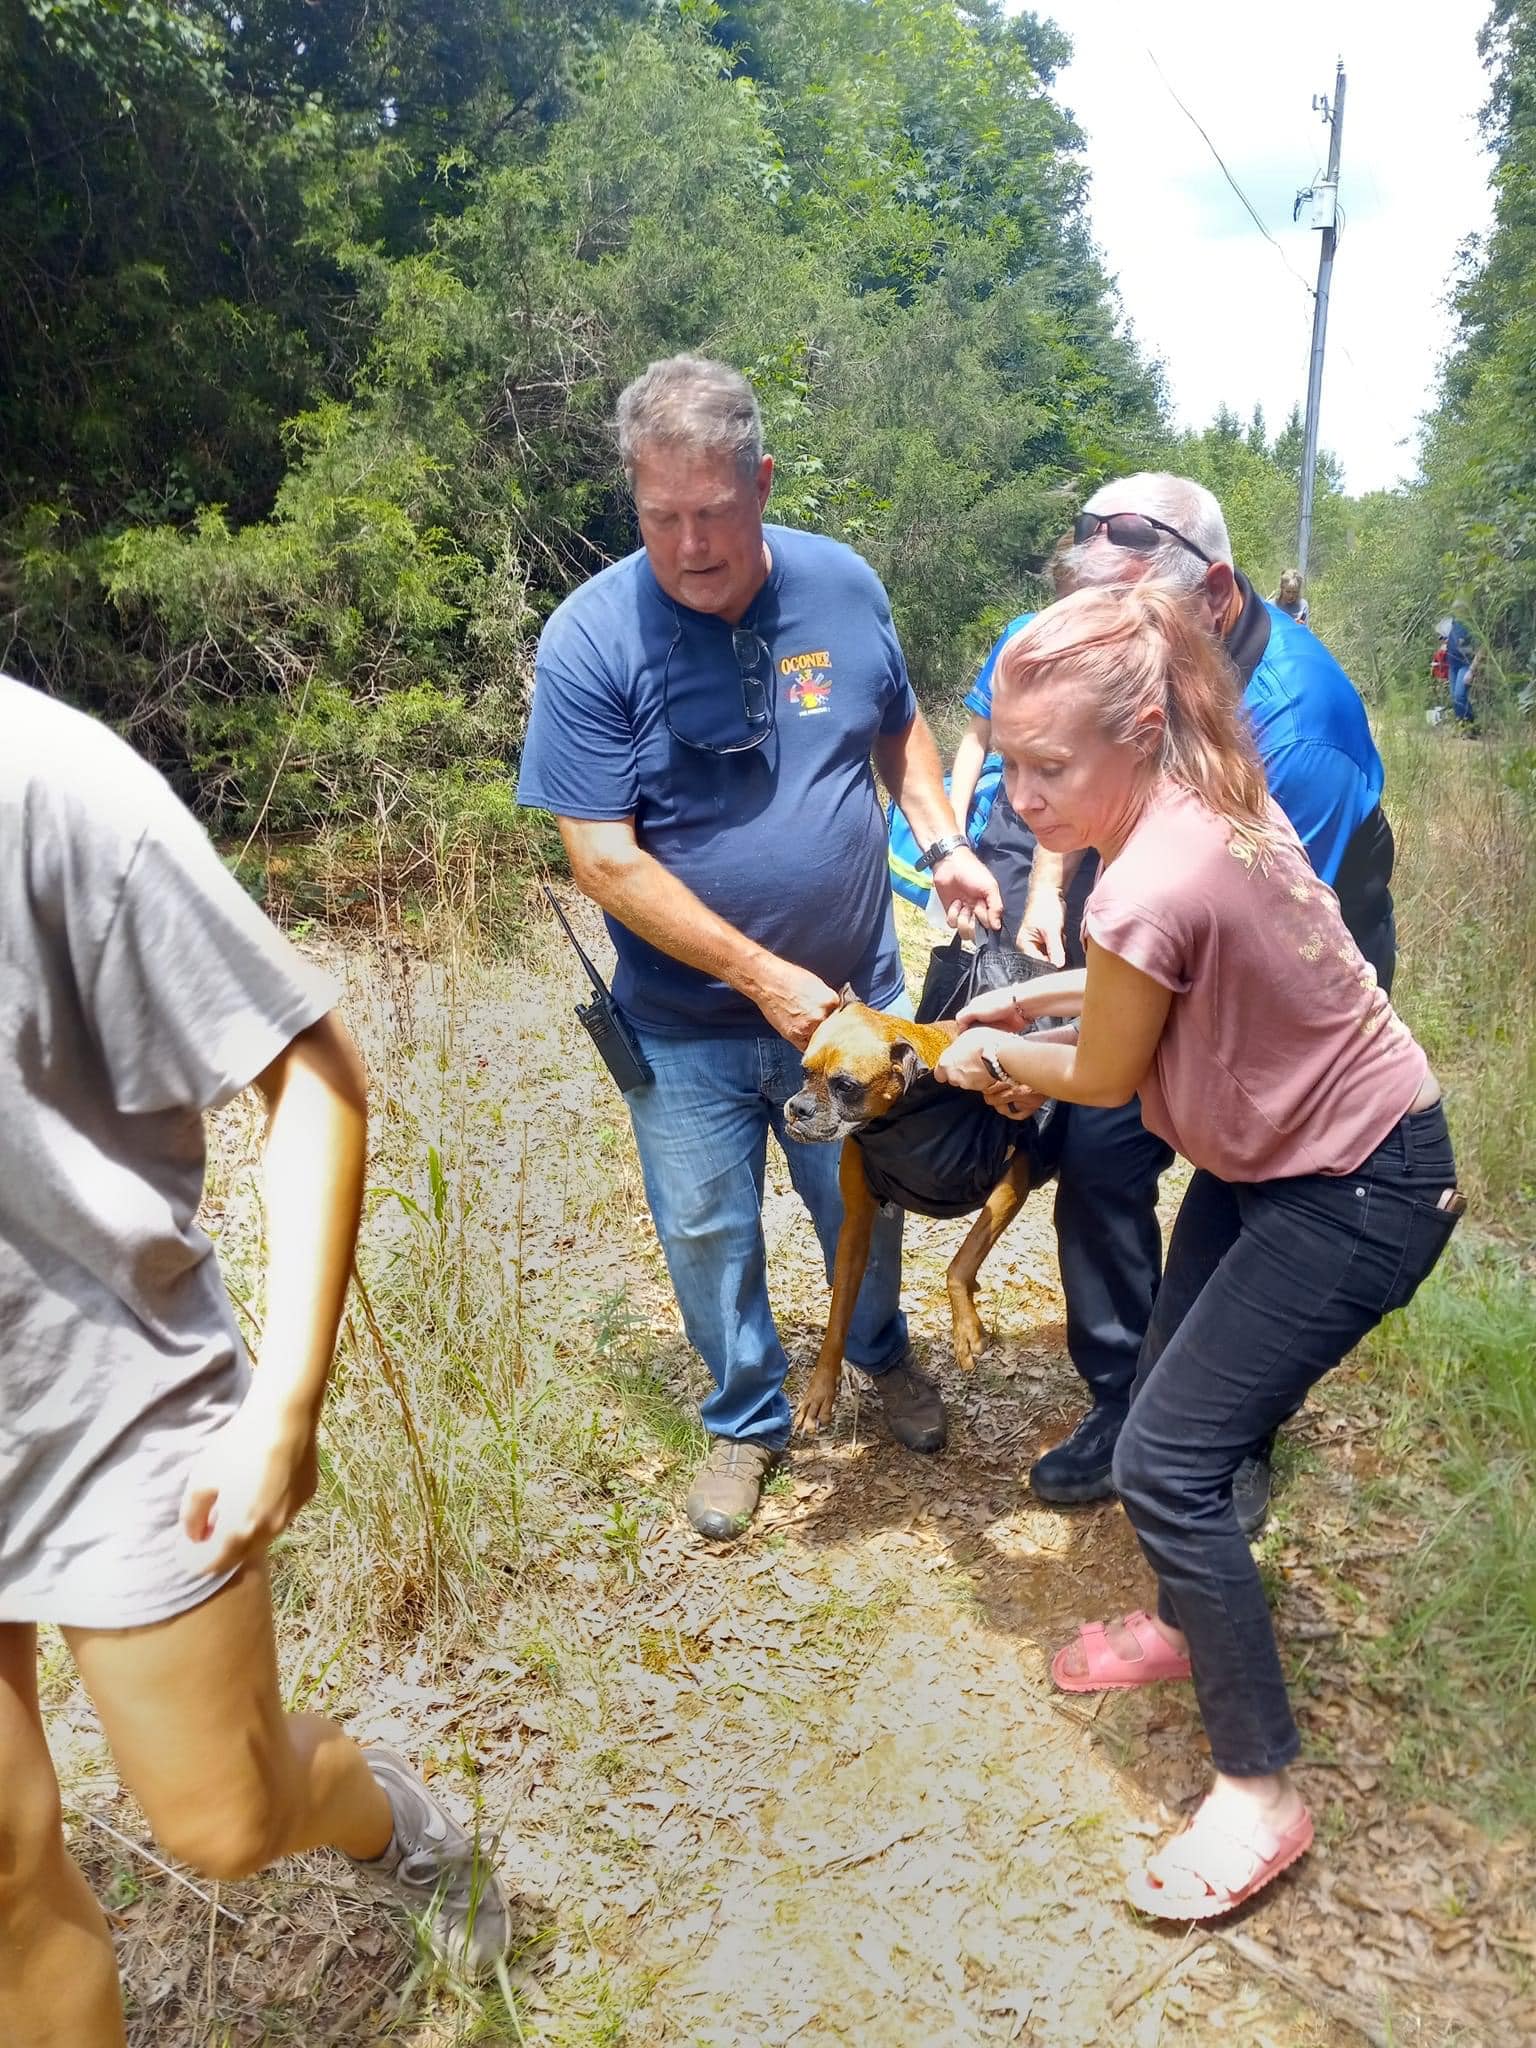 animal rescuers carry weakened dog to safety after he was trapped inside a deep well